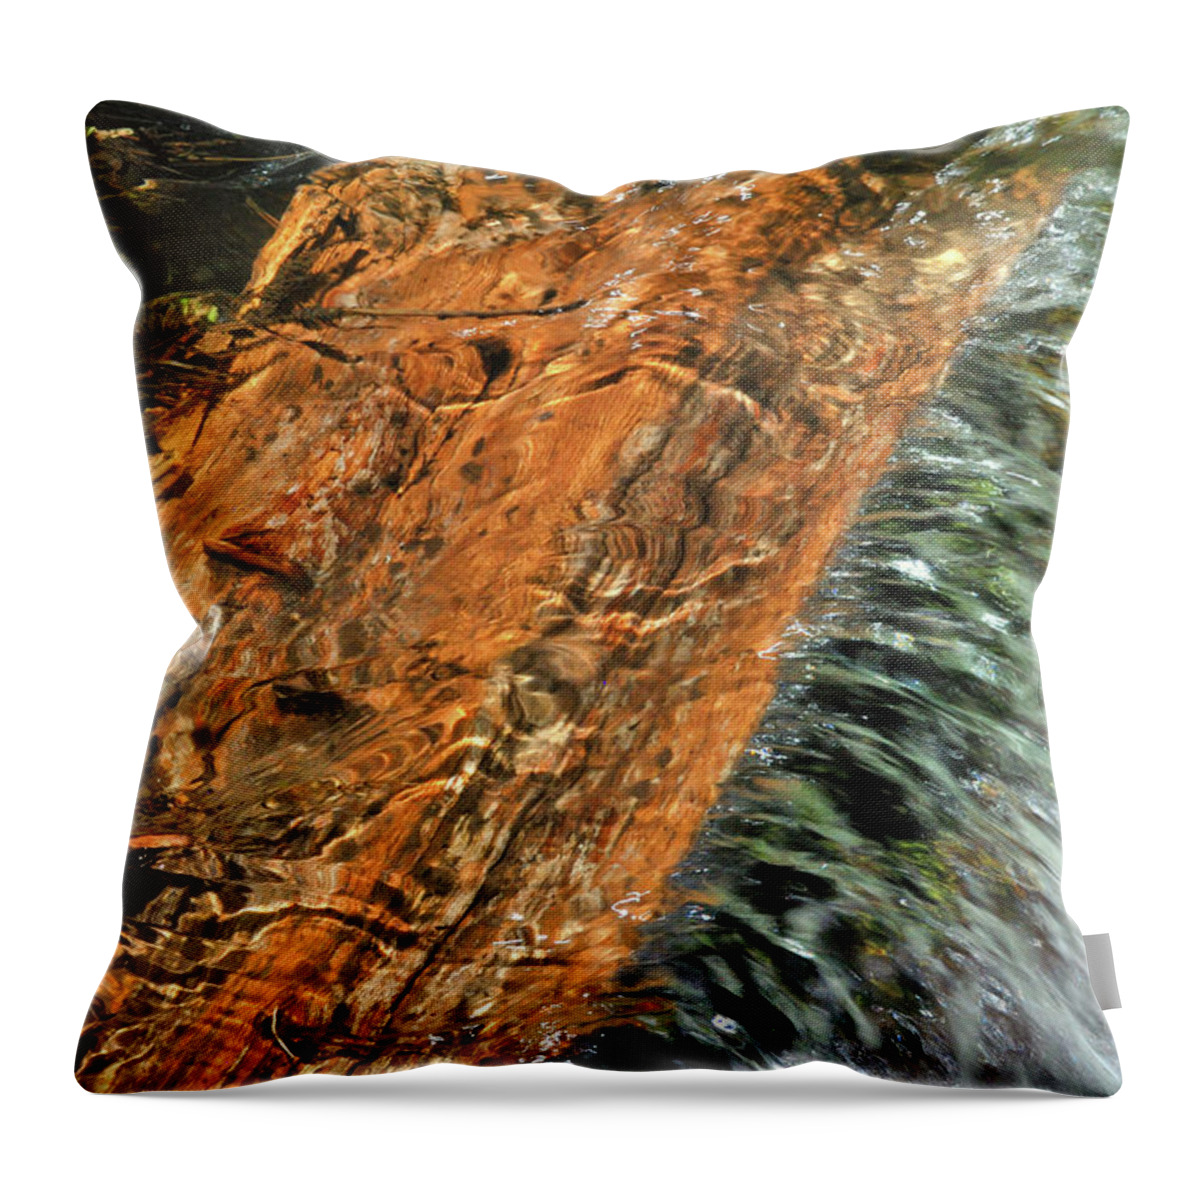 Nature Throw Pillow featuring the photograph Water And Wood by Ron Cline